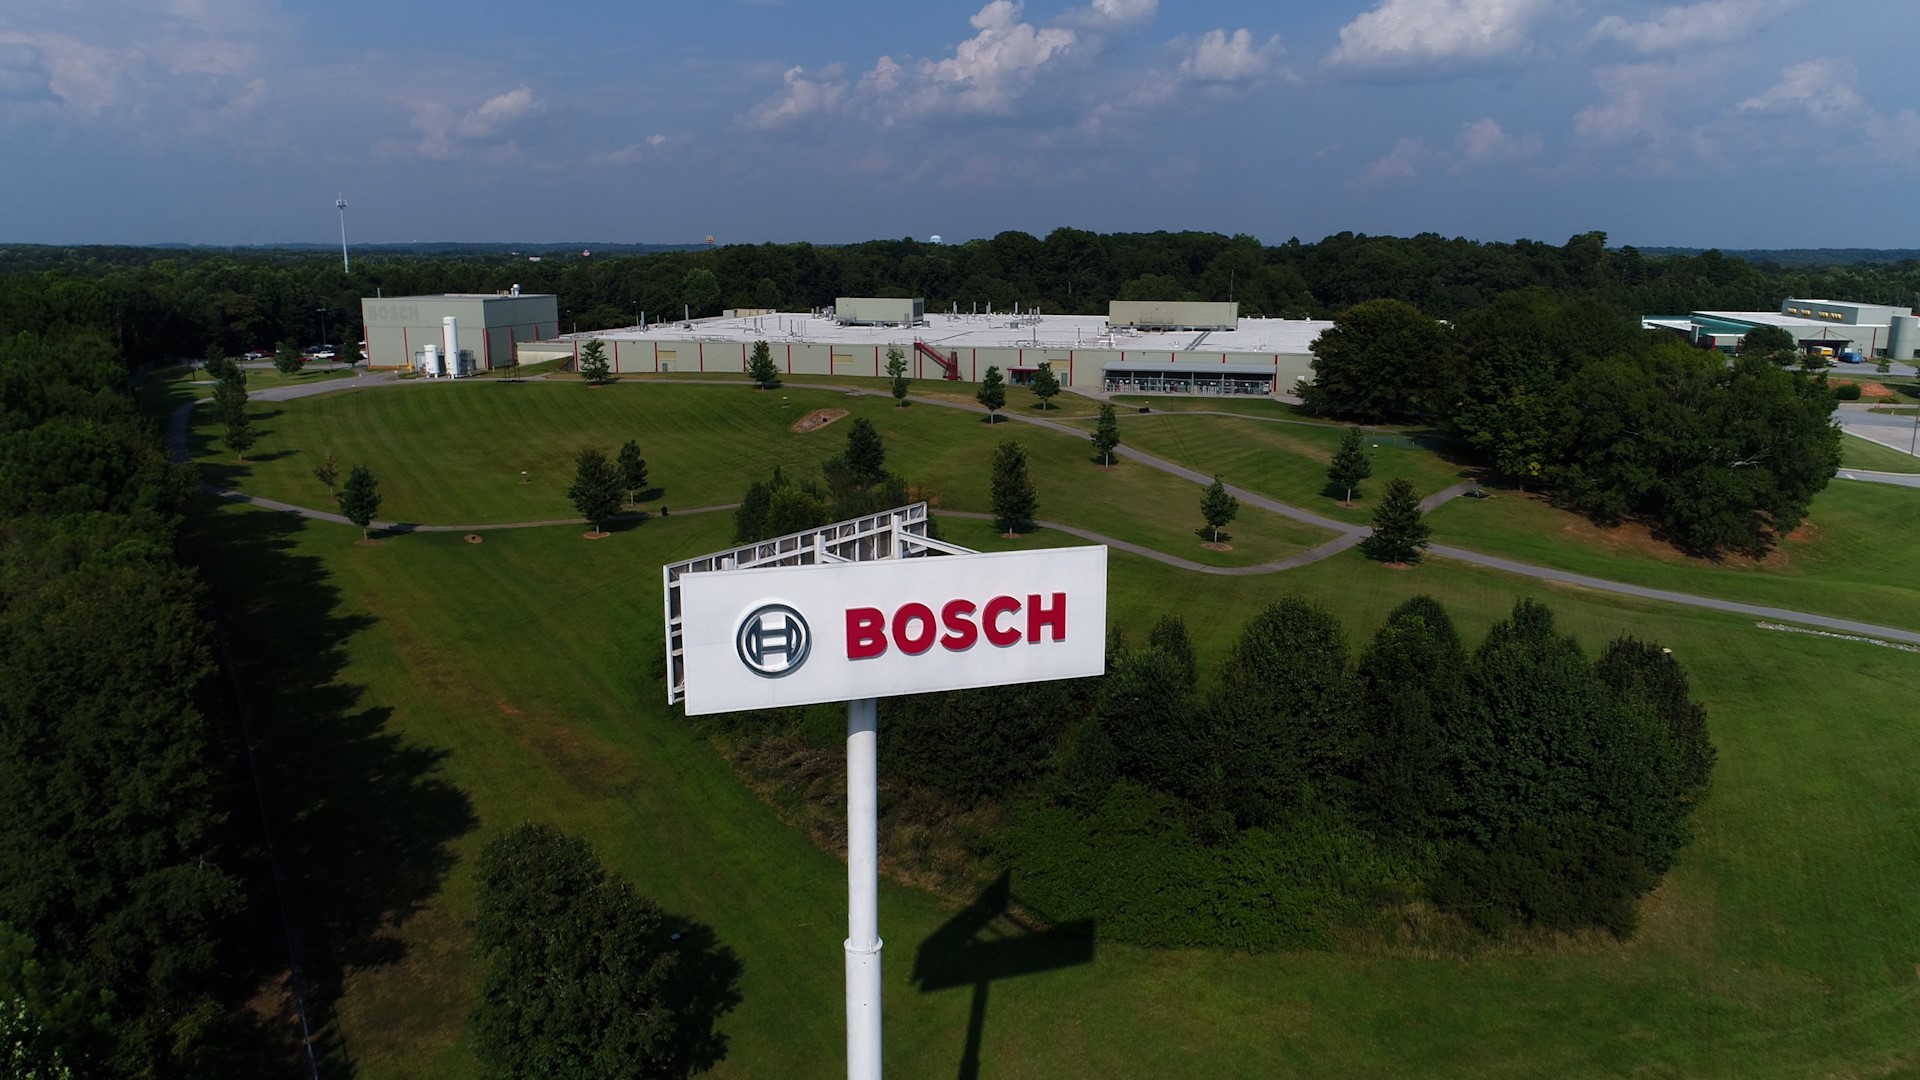 Bosch announces investment of more than $200 million to produce fuel cell stacks in Anderson, S.C.